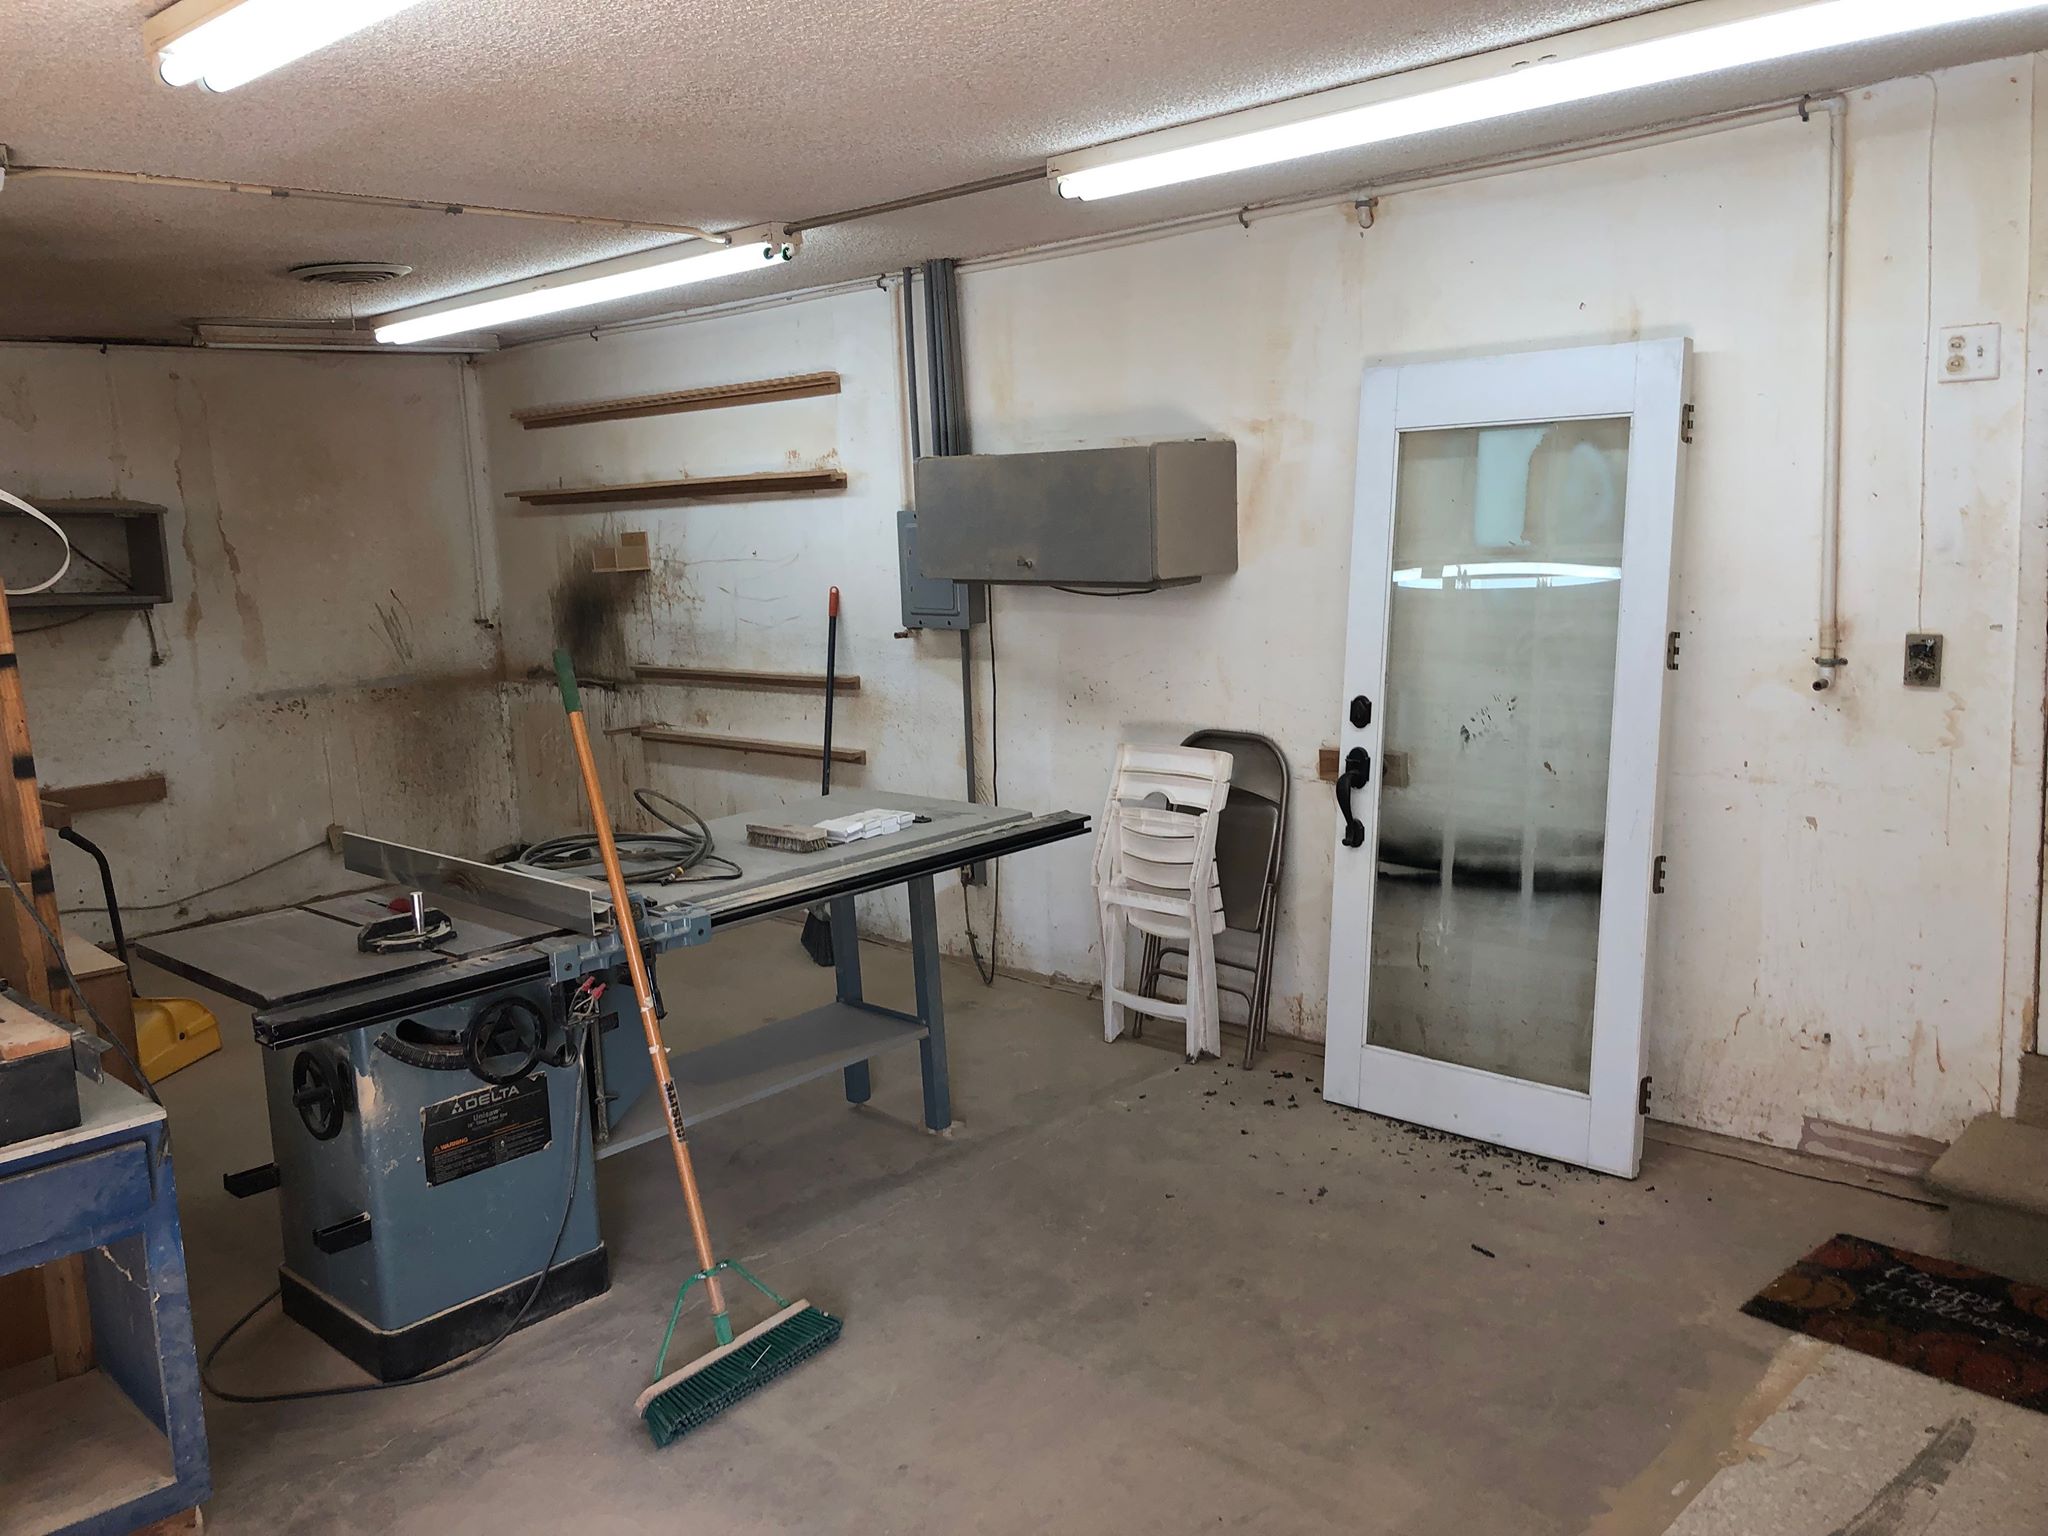 The new woodworking shop is part of the Heights CDC complex located at 761 National Street. The space also includes the Height Line Design Center and Heights community gallery space. (Scarlet Ponder)